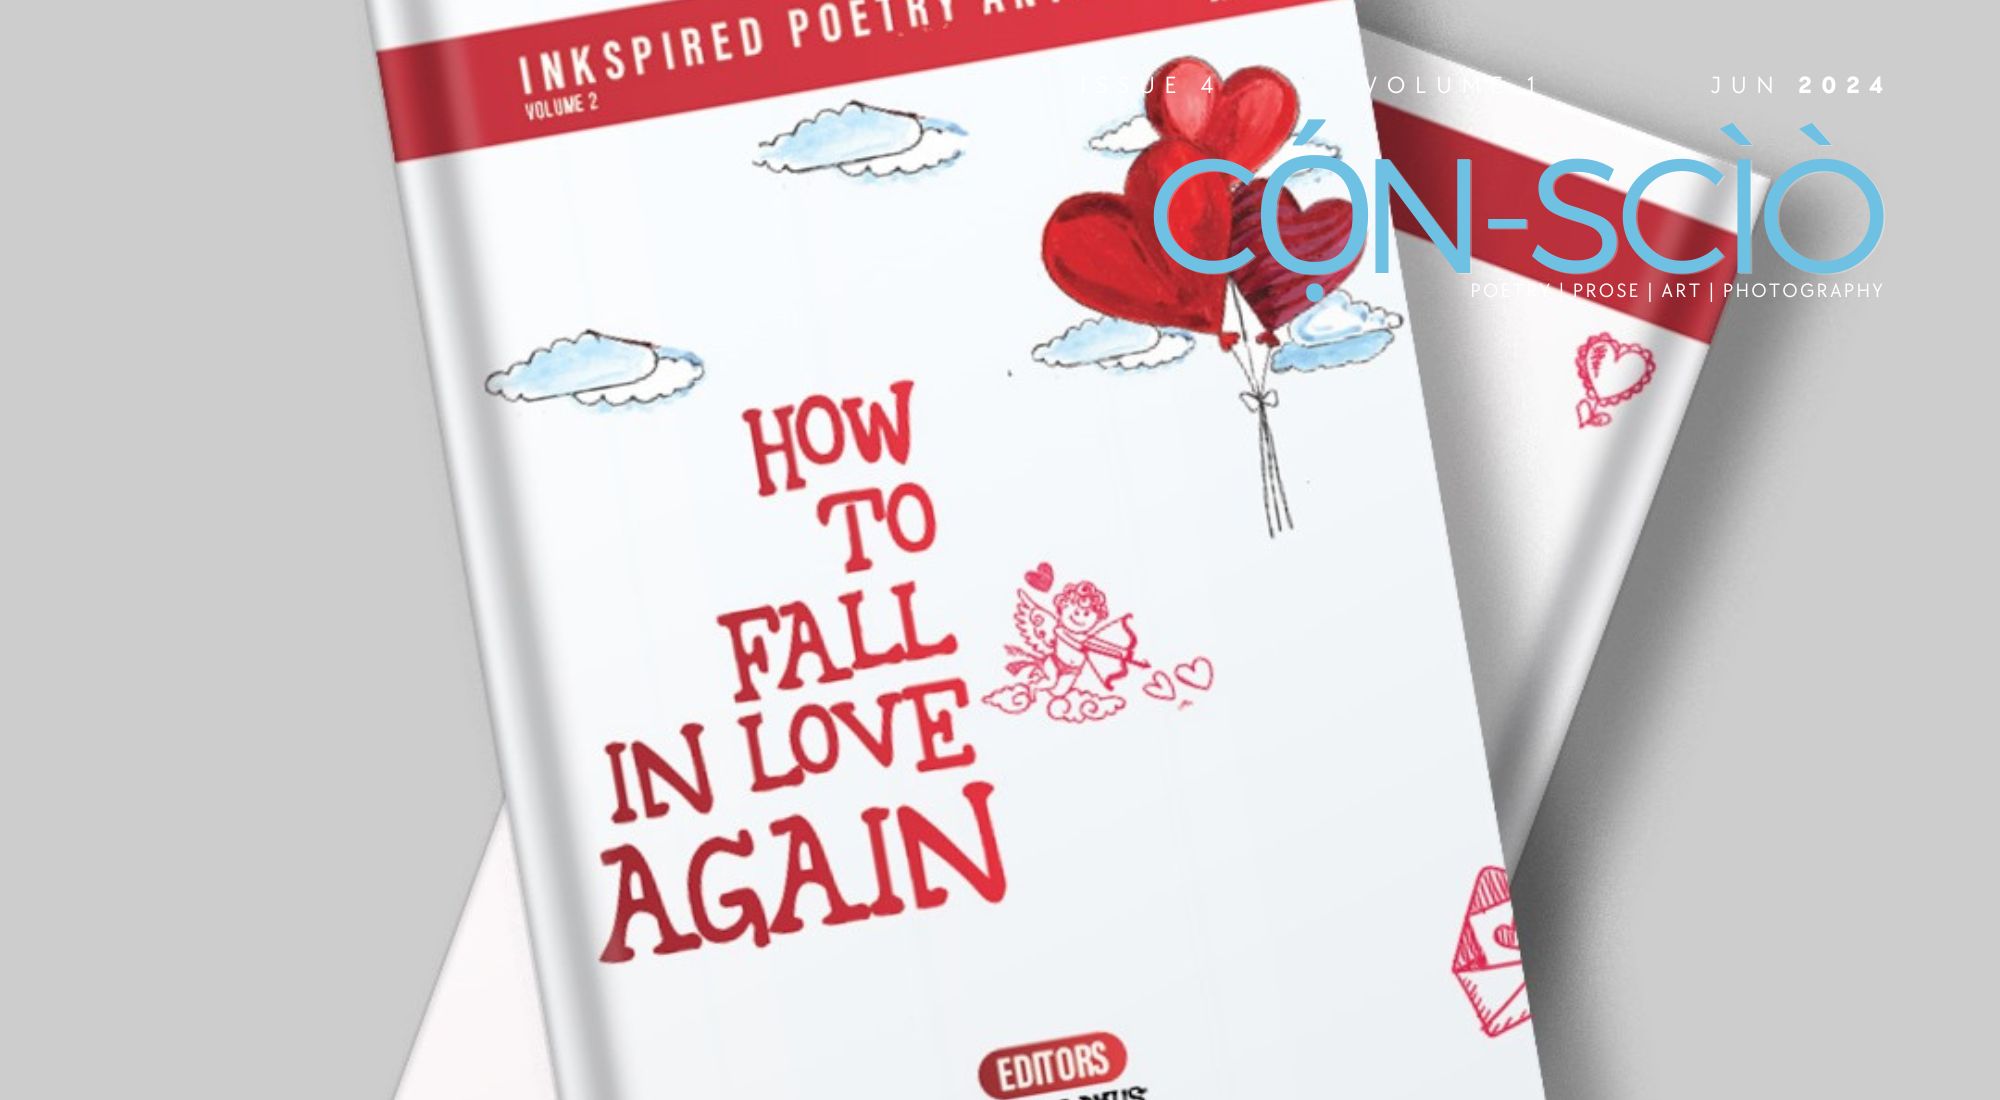 T&Cs of (un)Loving | a CỌ́N-SCÌÒ review of ‘How to Fall in Love Again’ anthology by Michael Chukwuka